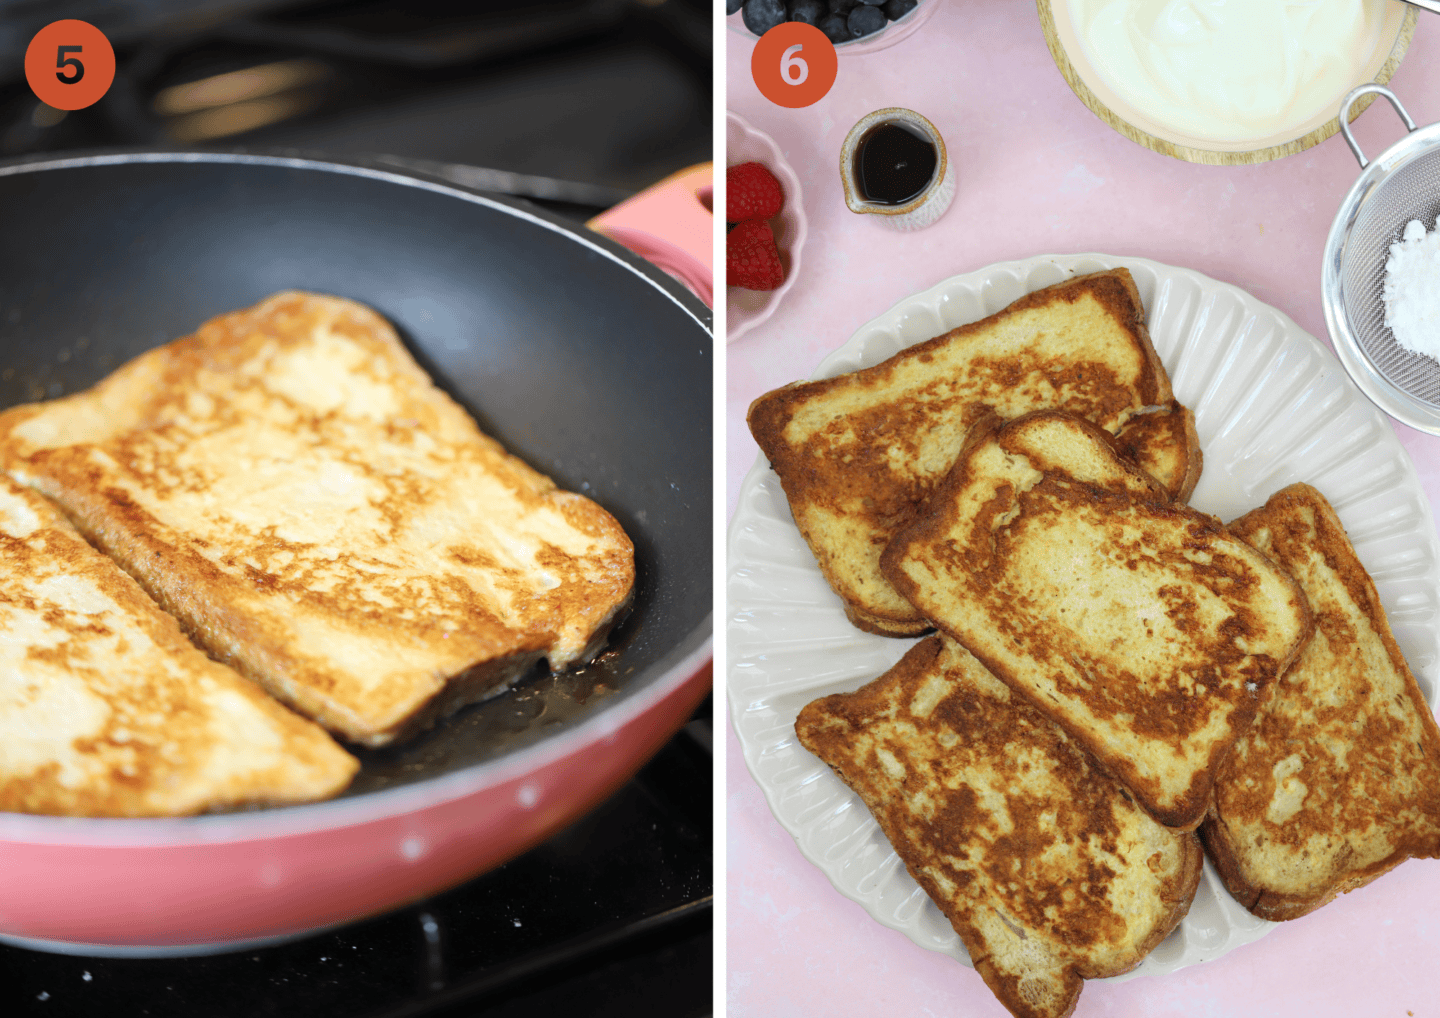 The bread flipped over in the pan and French toast on a plate.